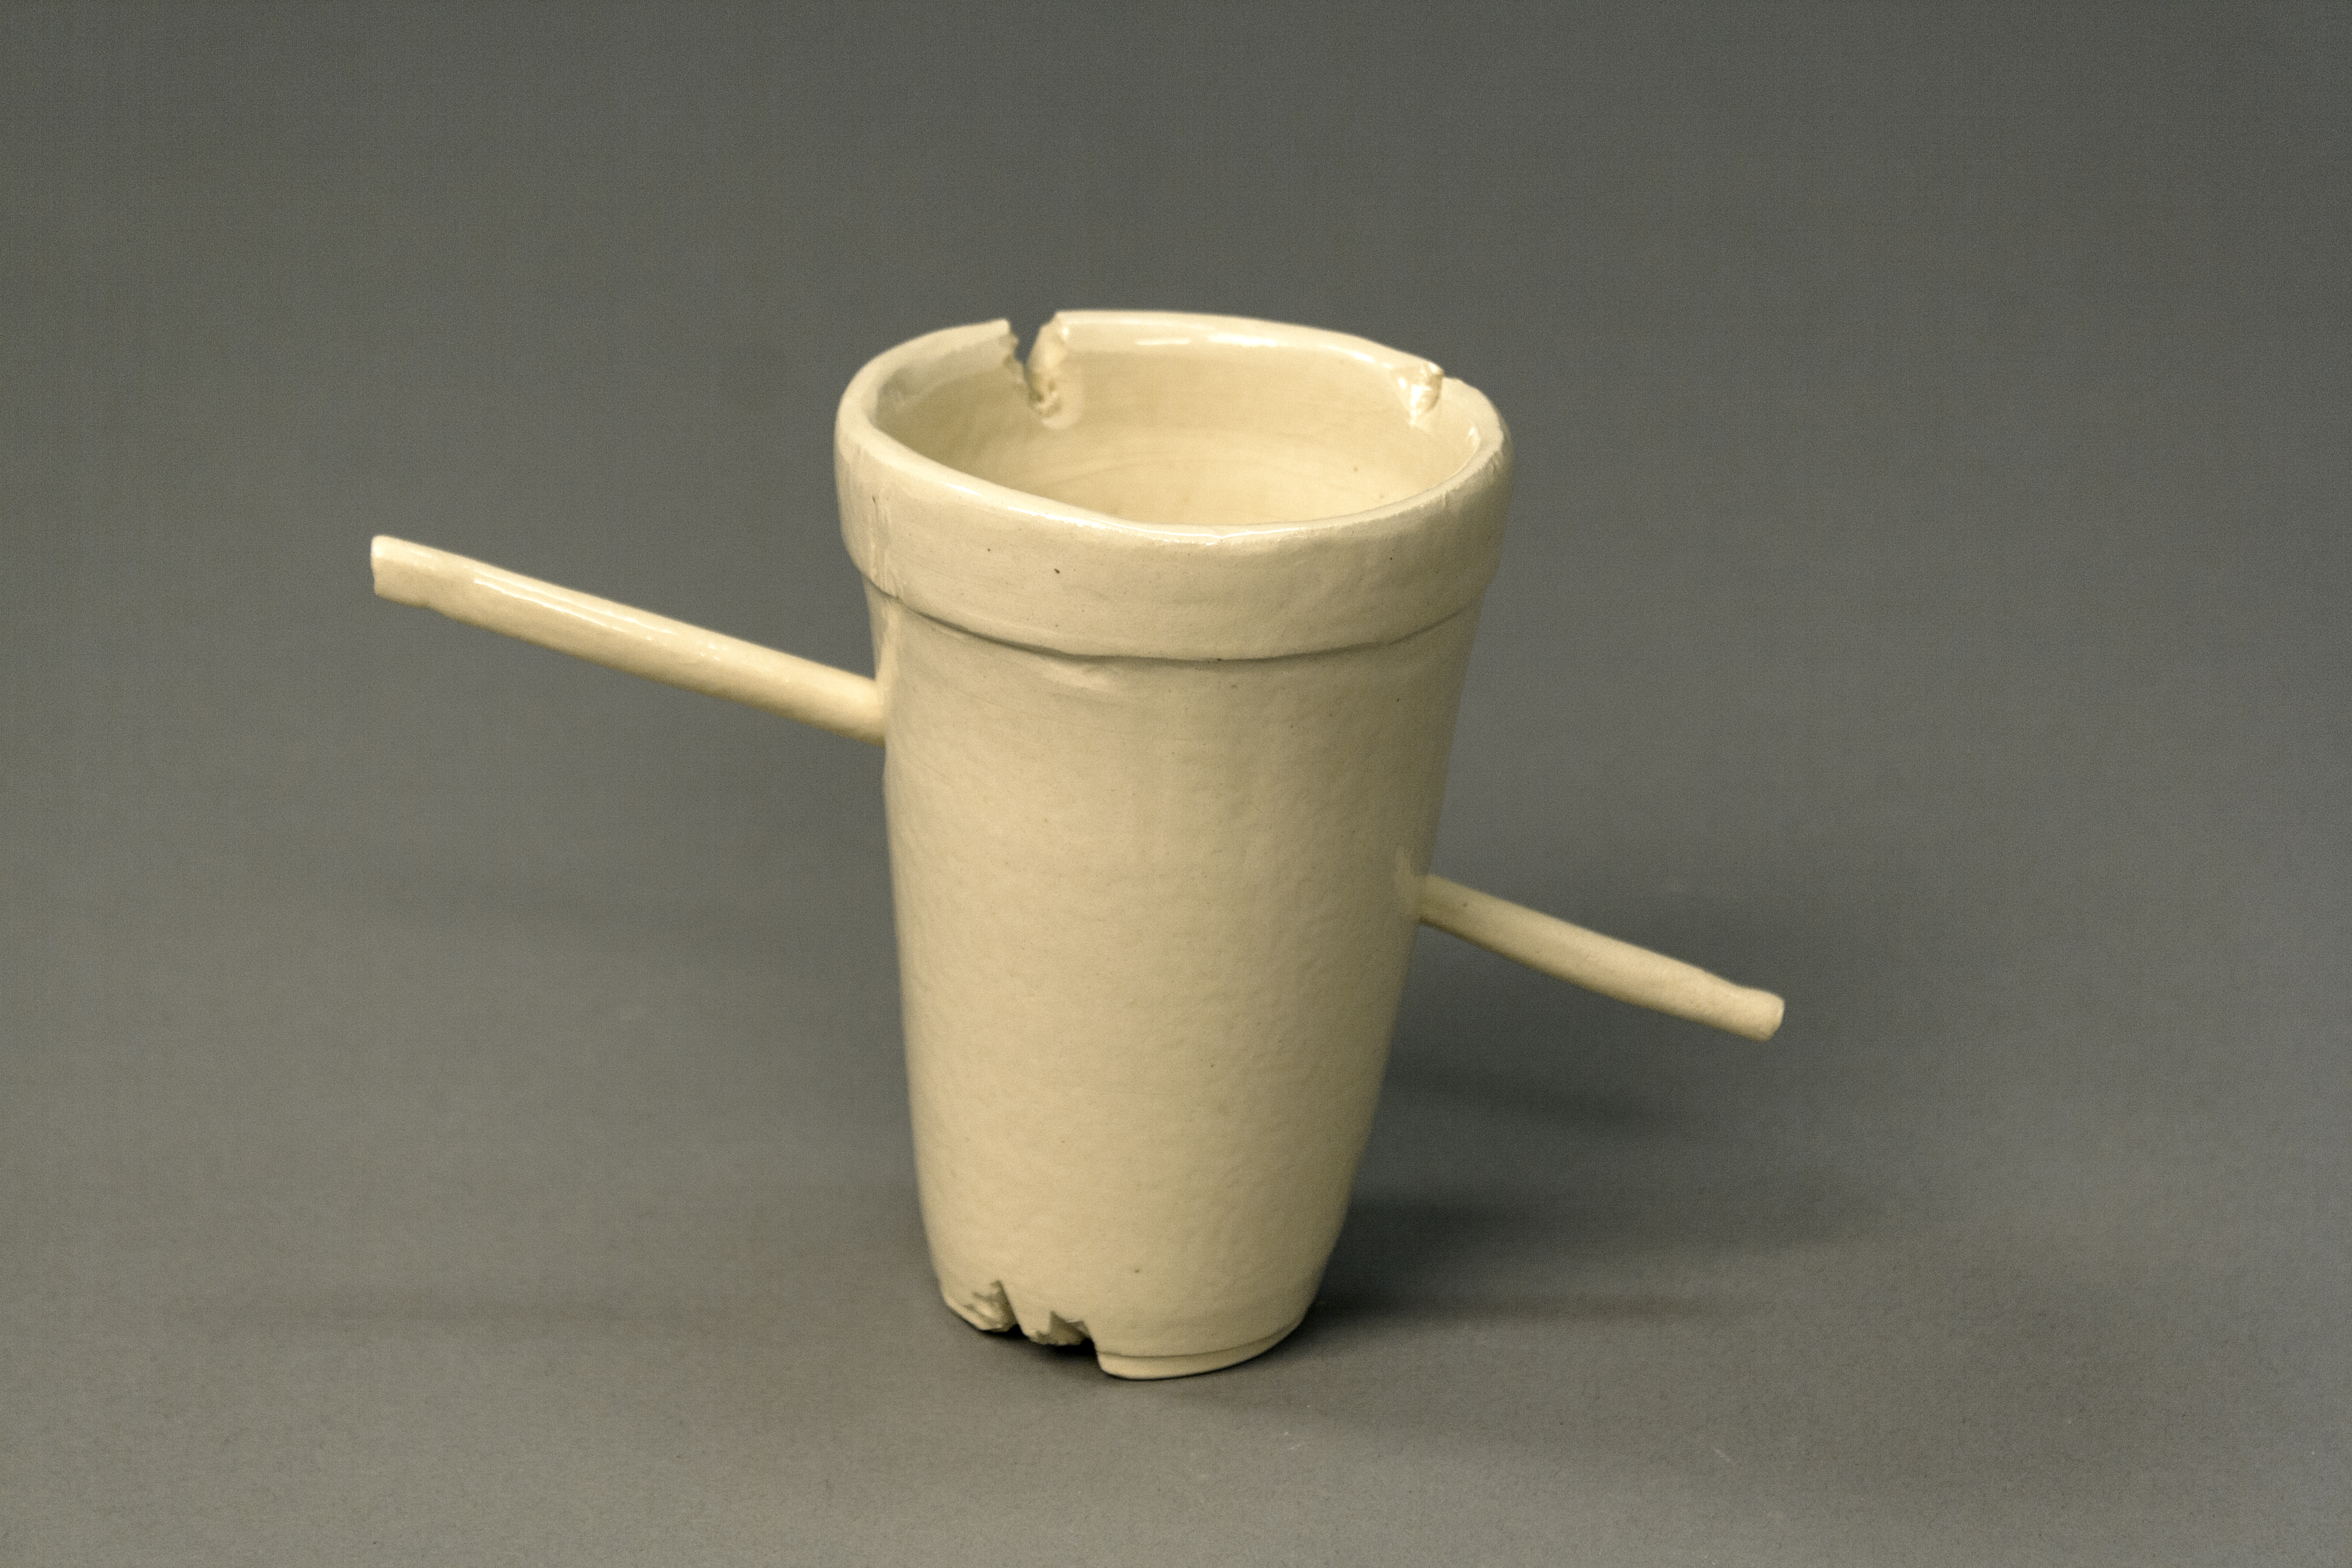 detail of cup with straw through it.